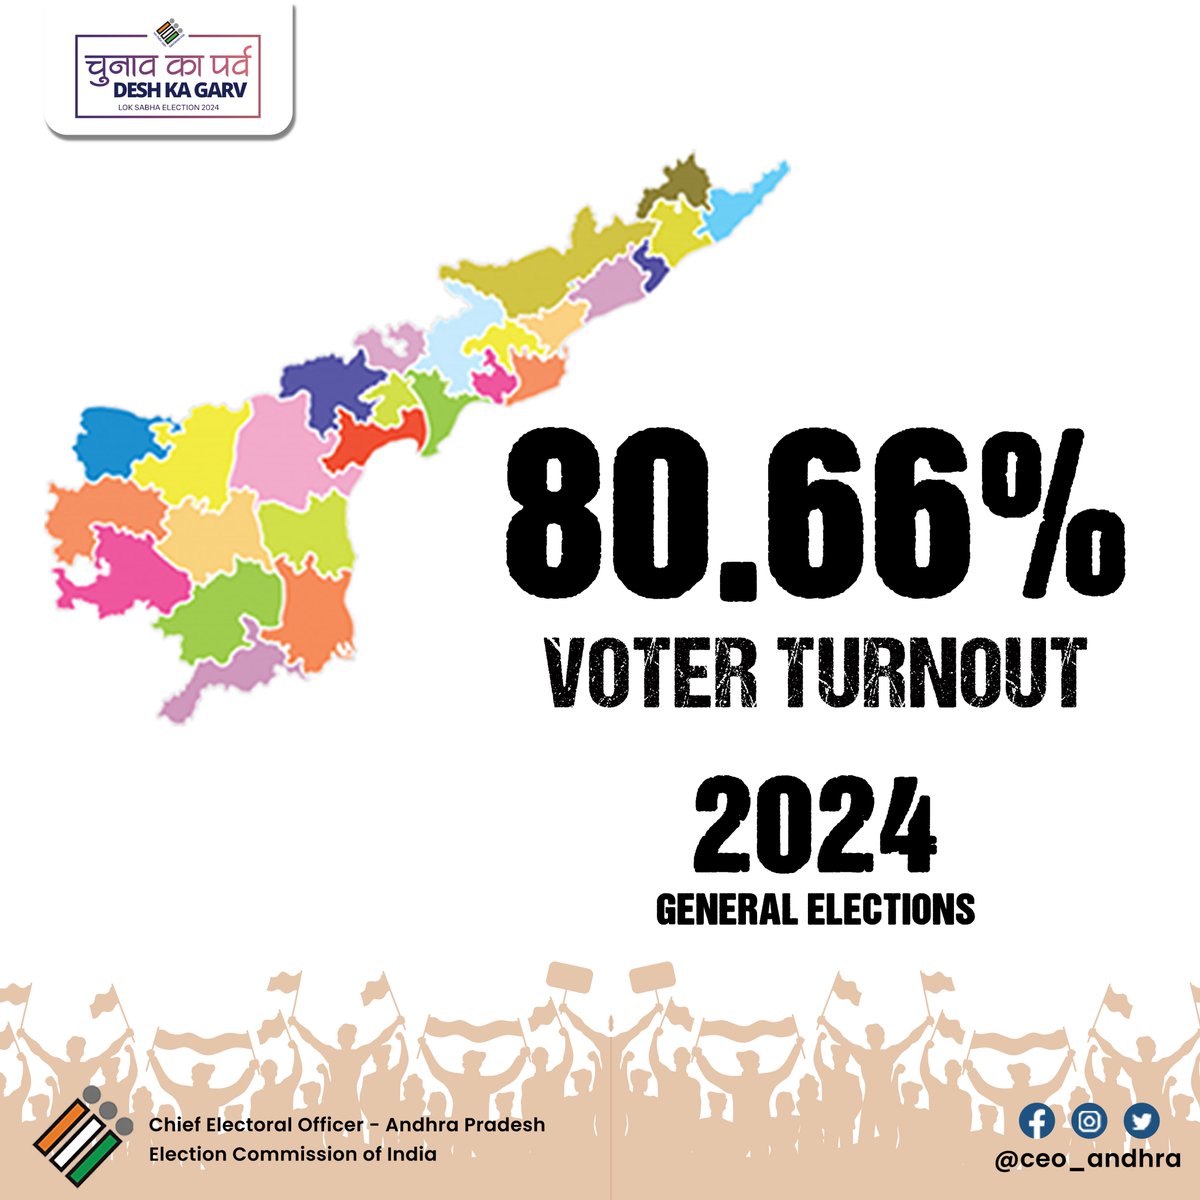 Official data by Chief Electoral Officer, Andhra Pradesh.